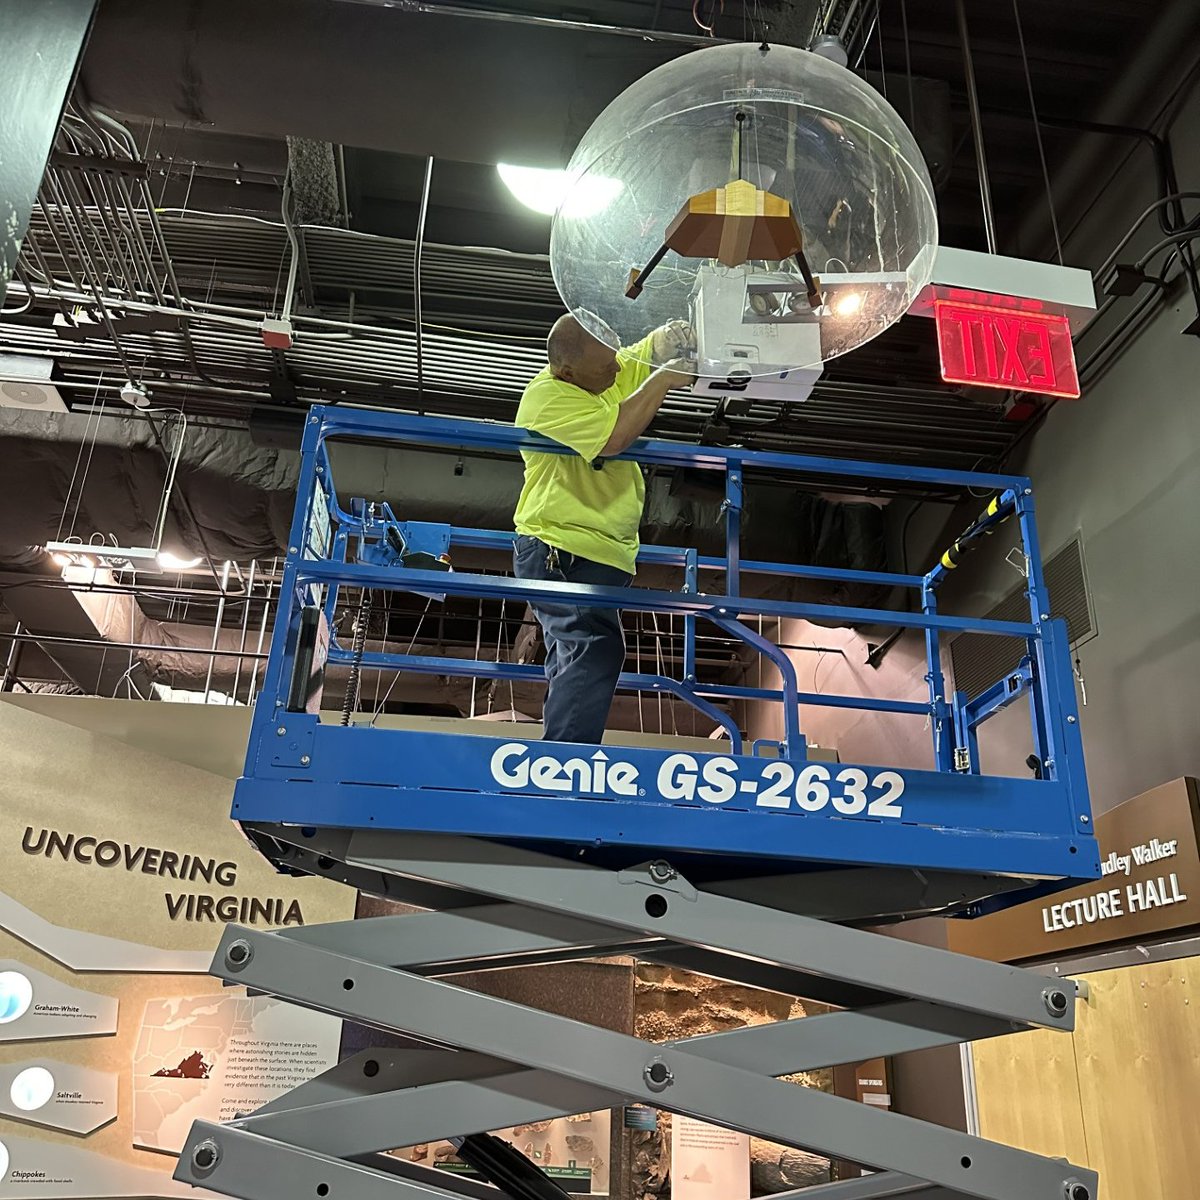 Being closed to visitors on Mondays gives the museum's Buildings & Grounds team the opportunity to make repairs inside the exhibit galleries! Today, technician Joel Clifton is hard at work on an overhead projector that's an integral part of the 'Wild Watersheds' exhibit.